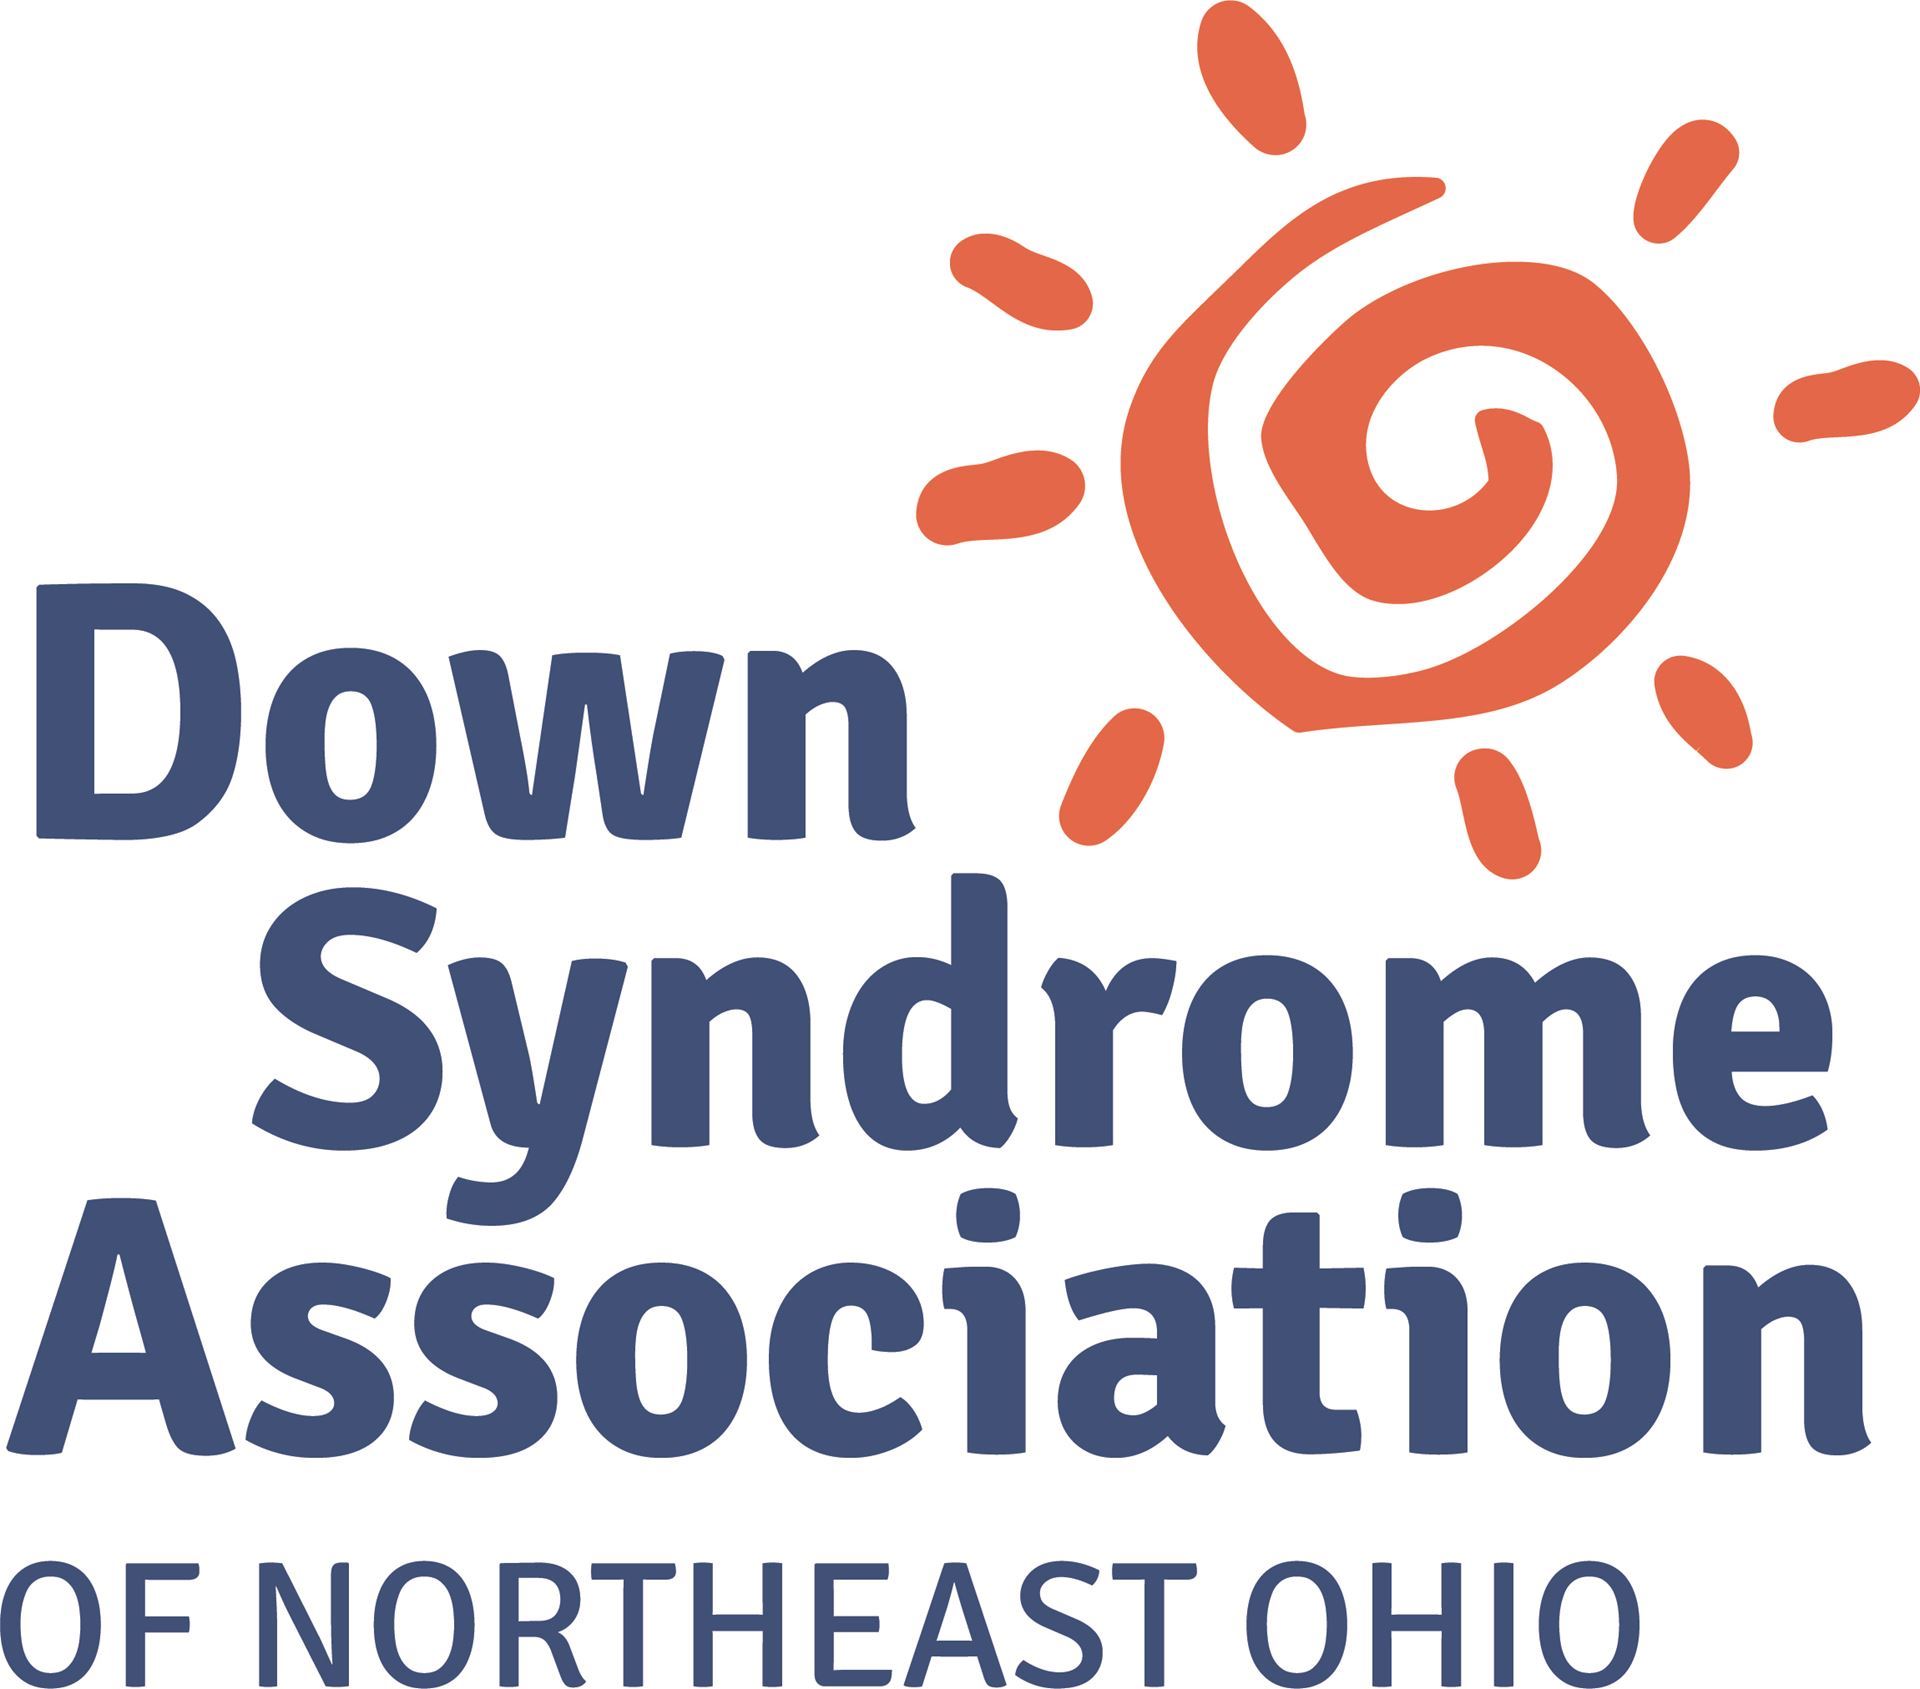 Click to access the Down Syndrome Association of Northeast Ohio website.